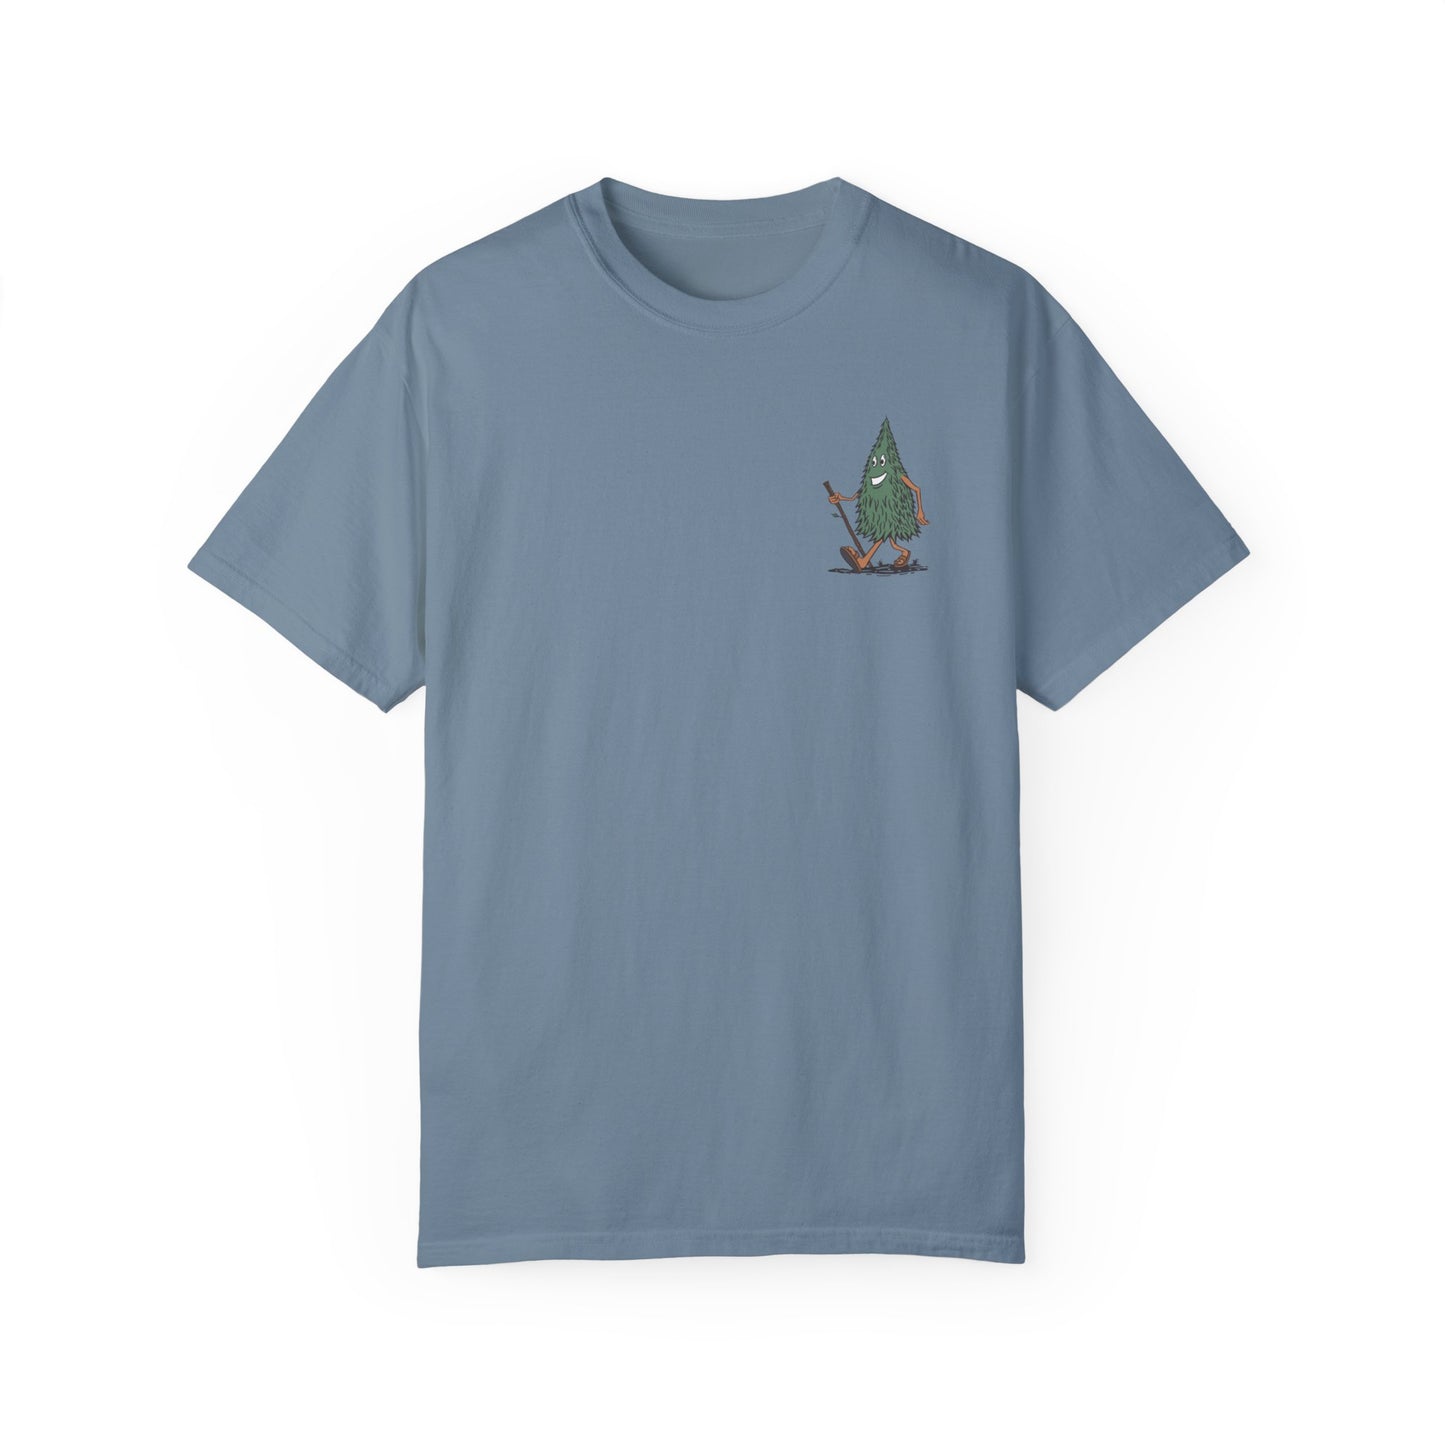 This Way to the National Forest Shirt